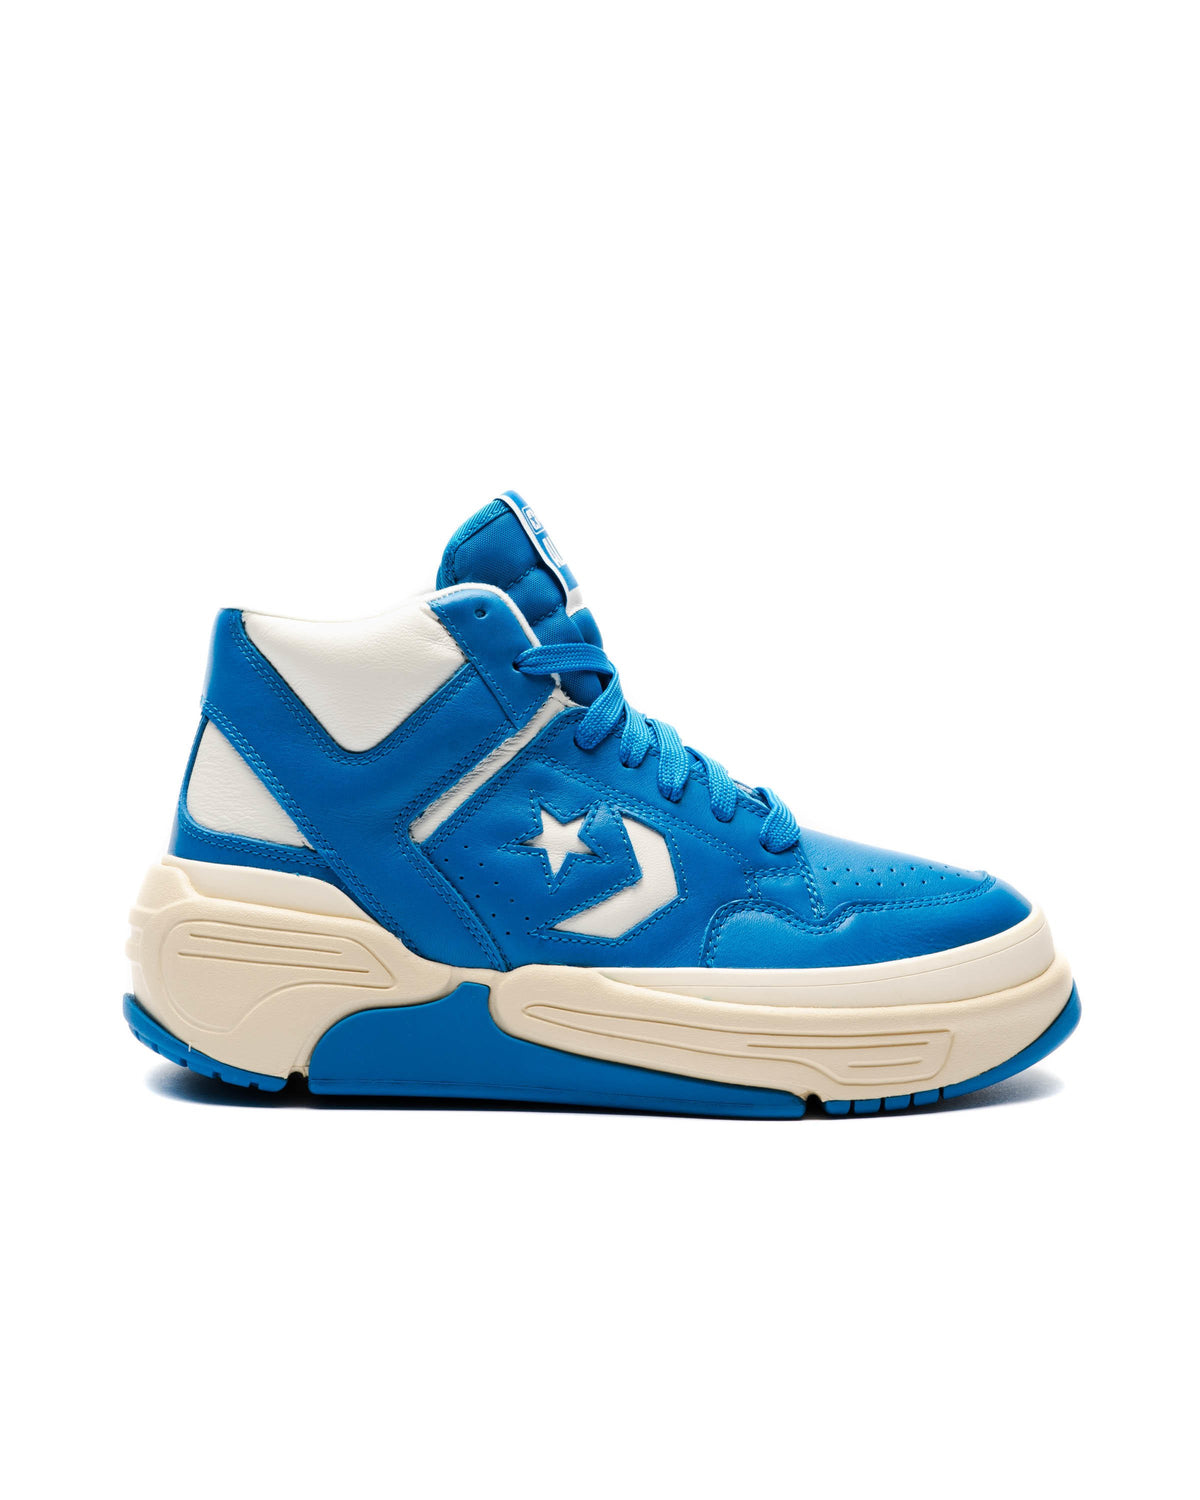 Converse WEAPON CX MID Loyalty Blue